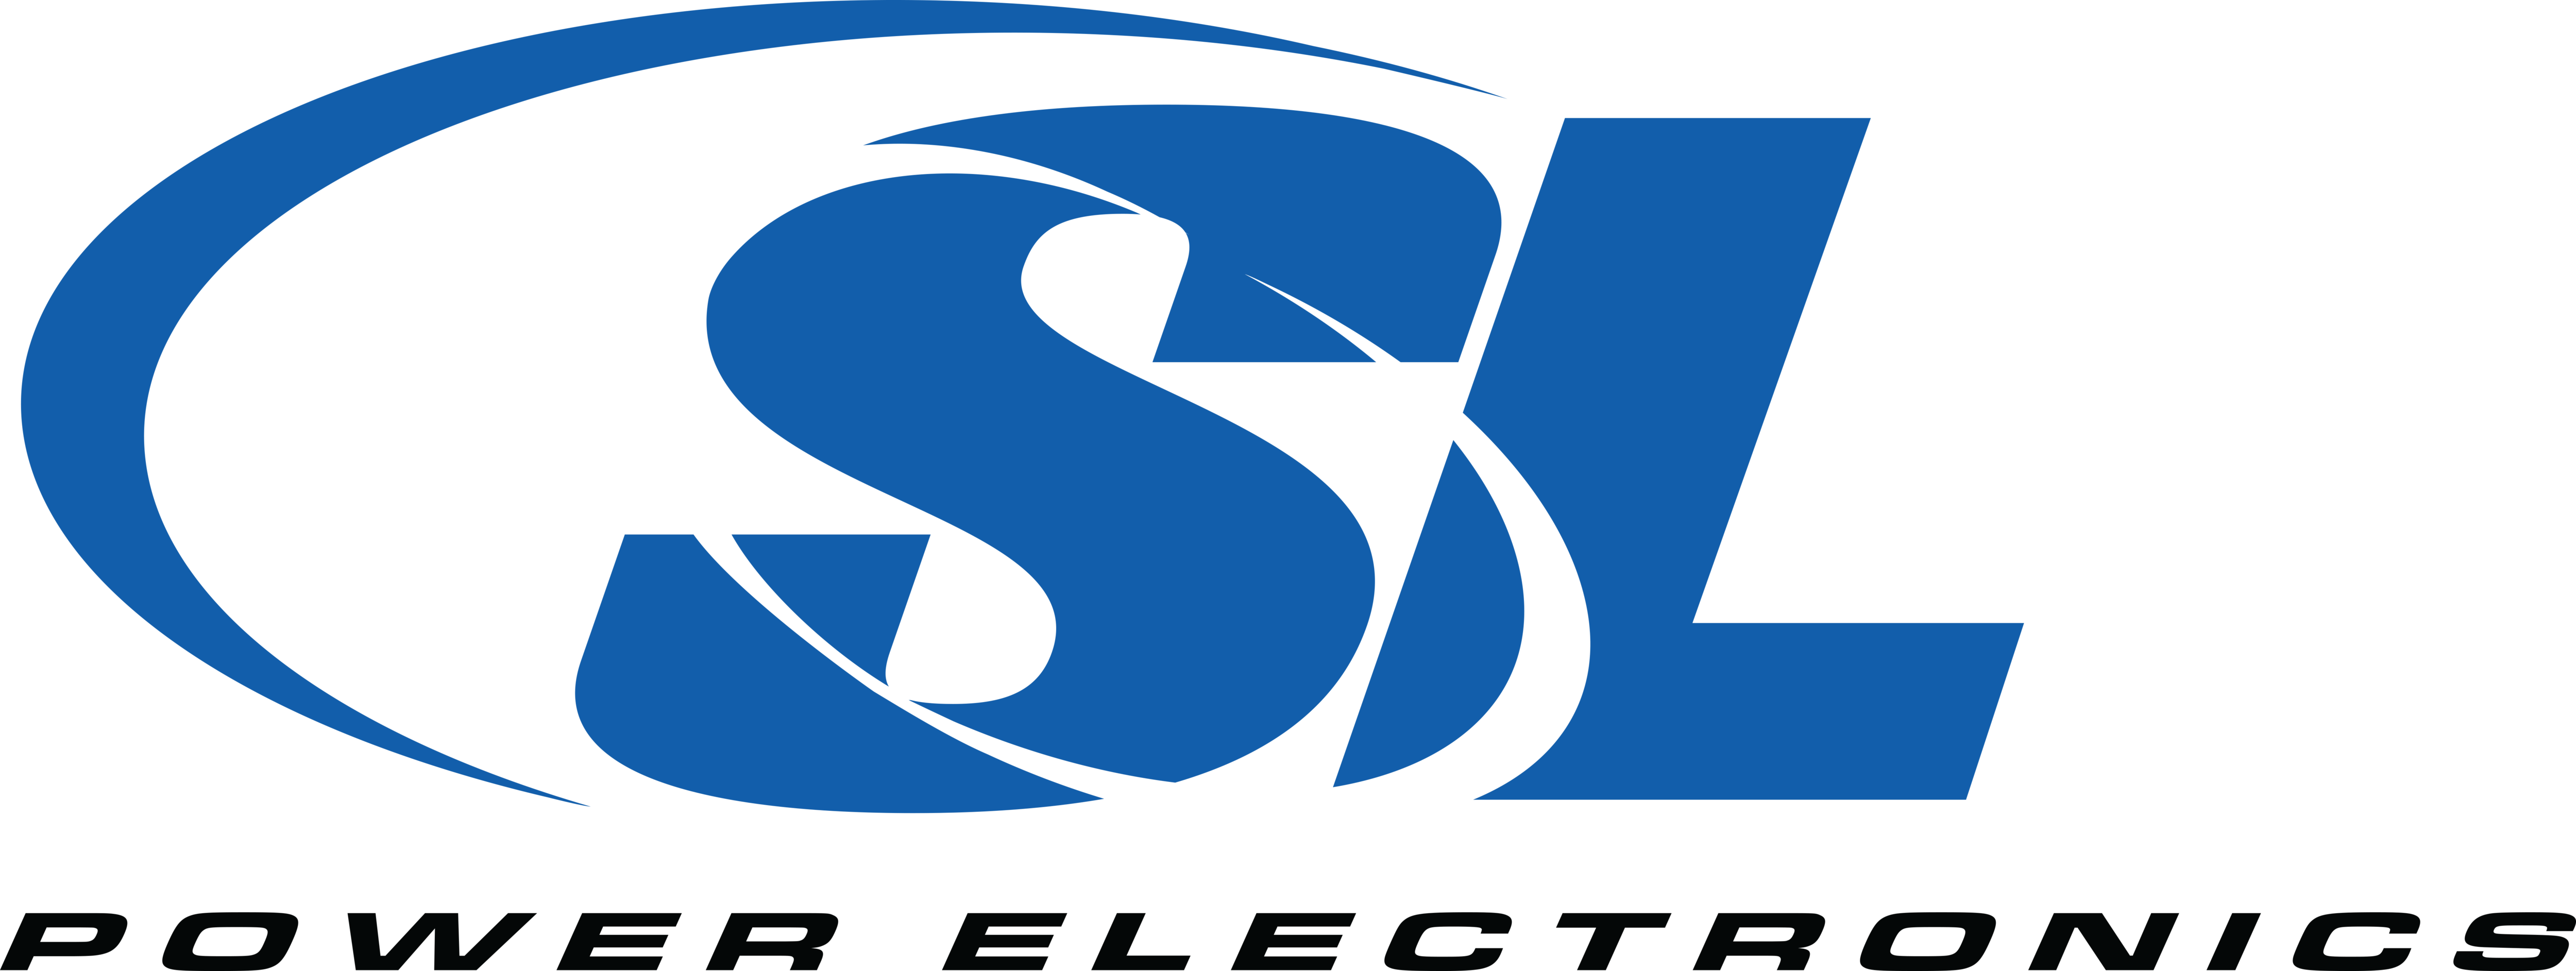 SL Power Electronics Manufacture of Condor/Ault Br LOGO